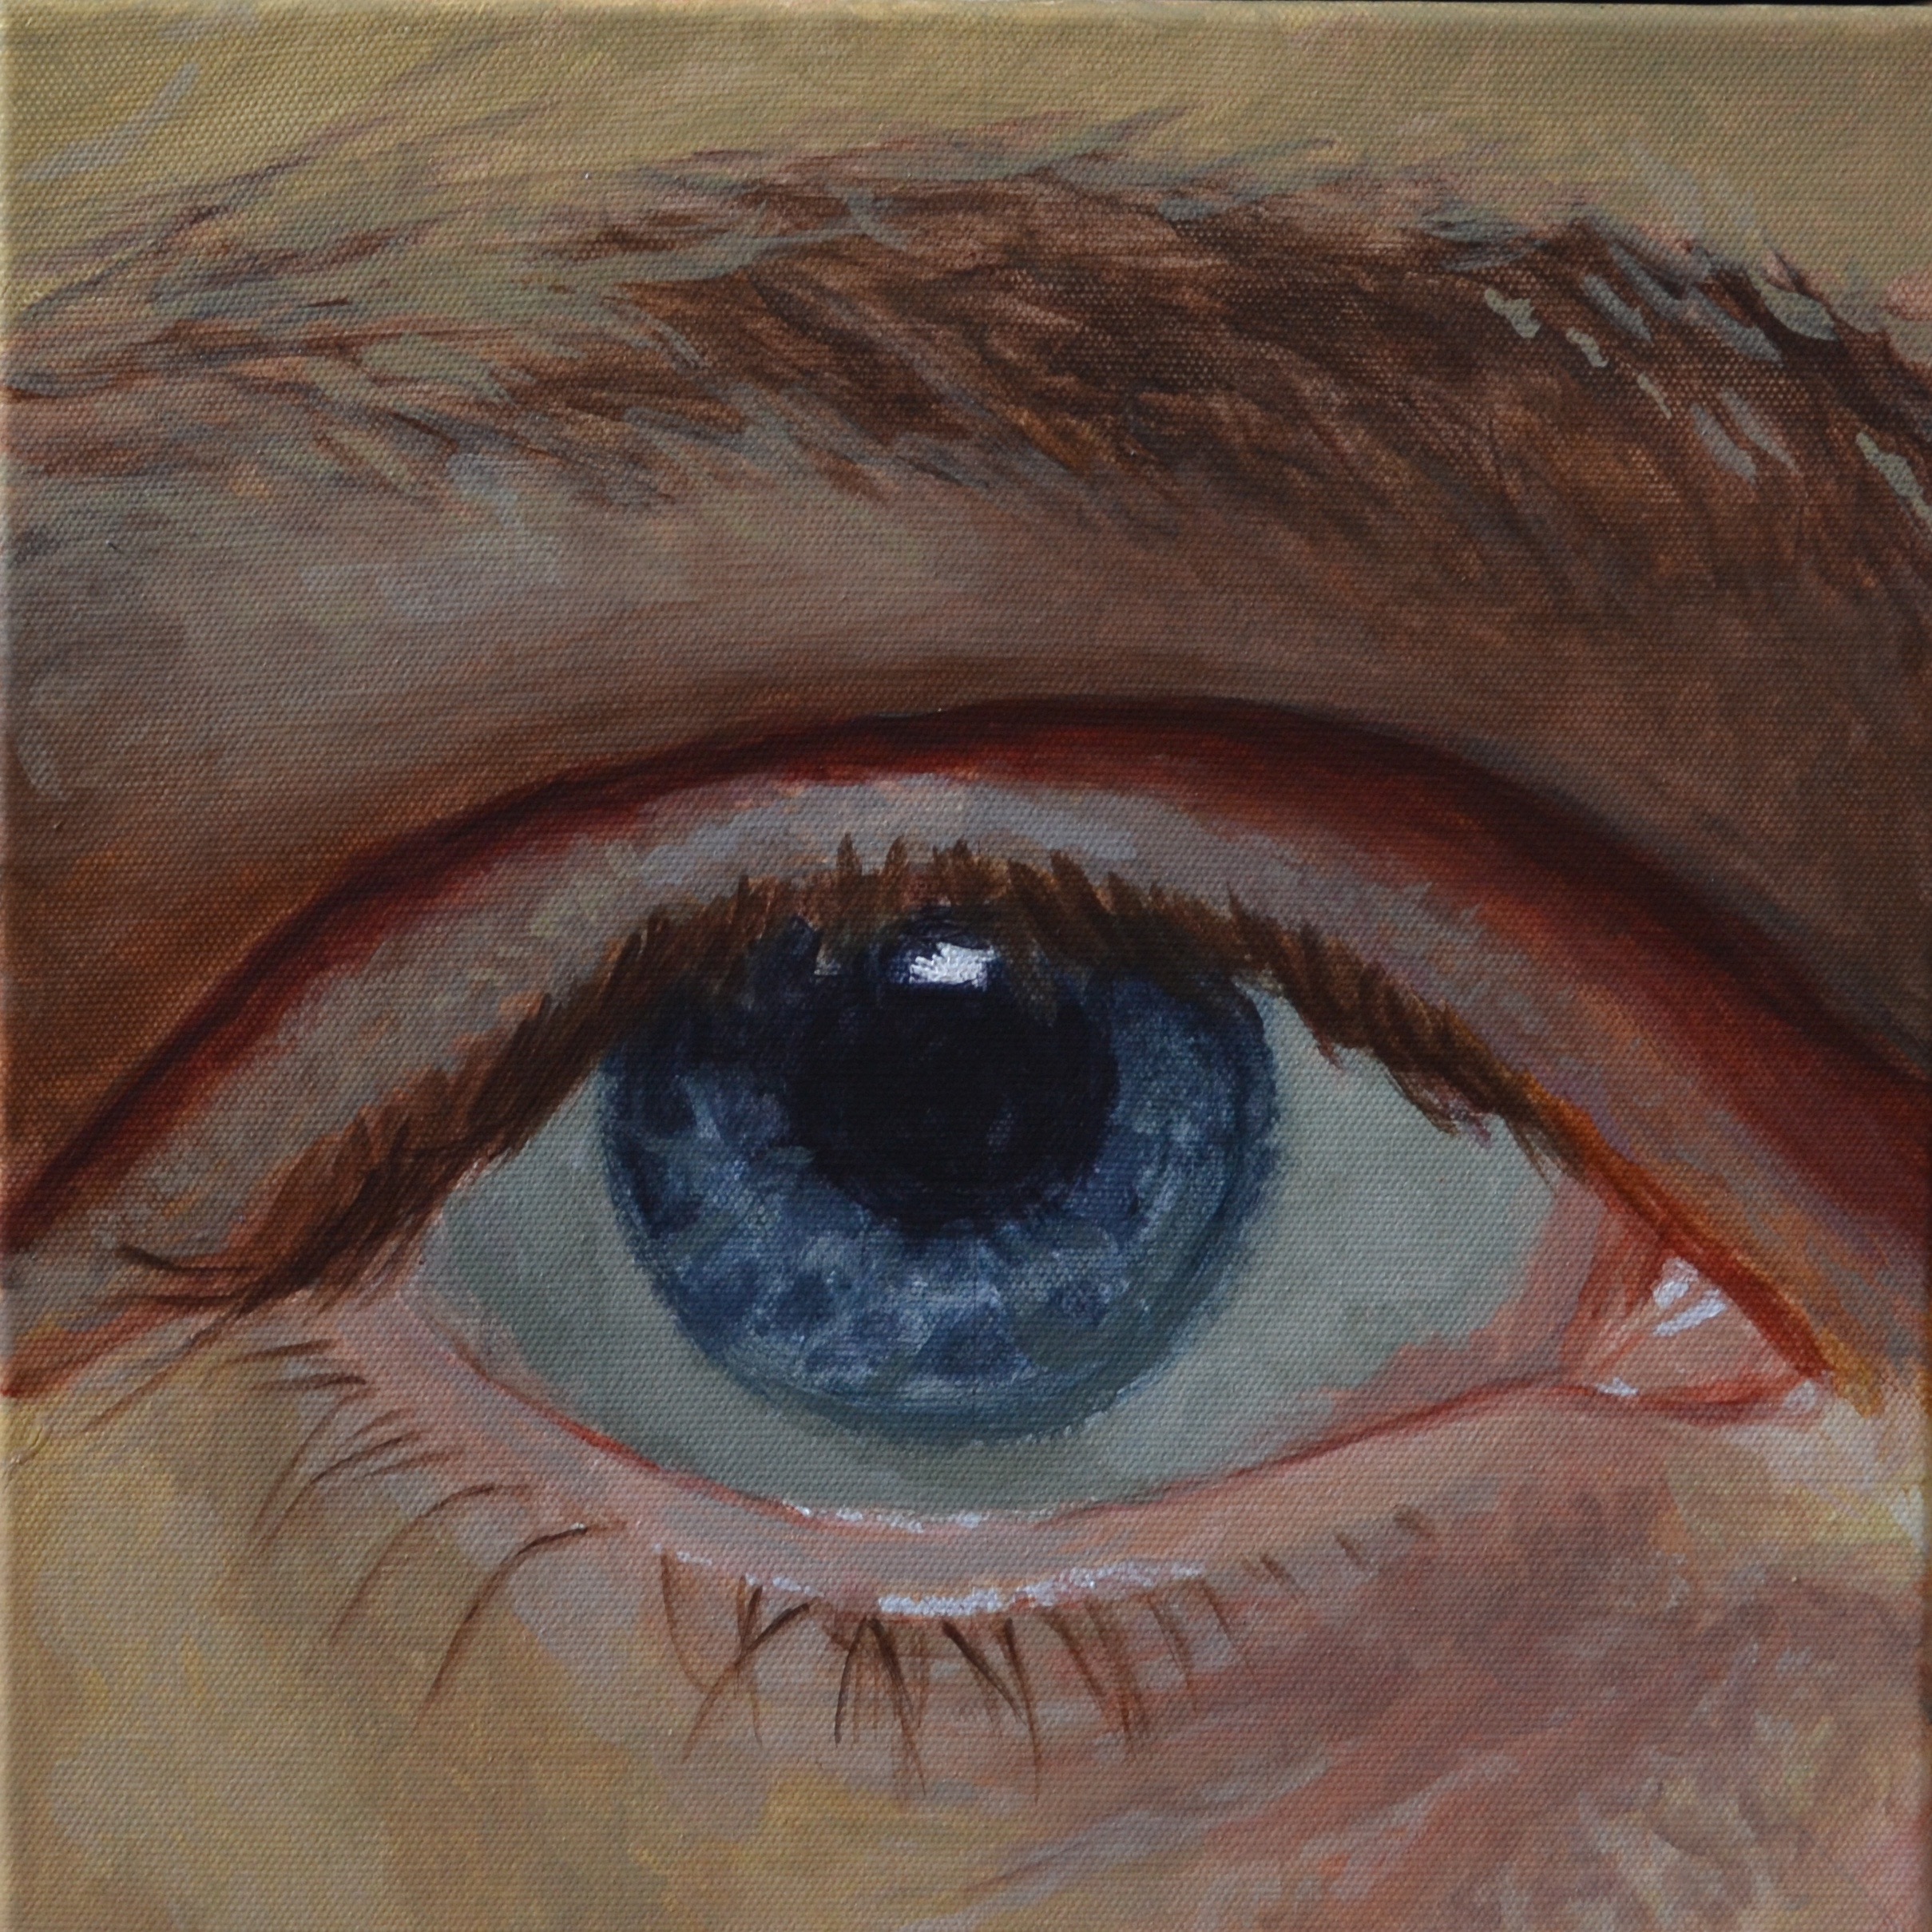 Caleb III is a portrait of an eye by Mississippi artist Traci Stover